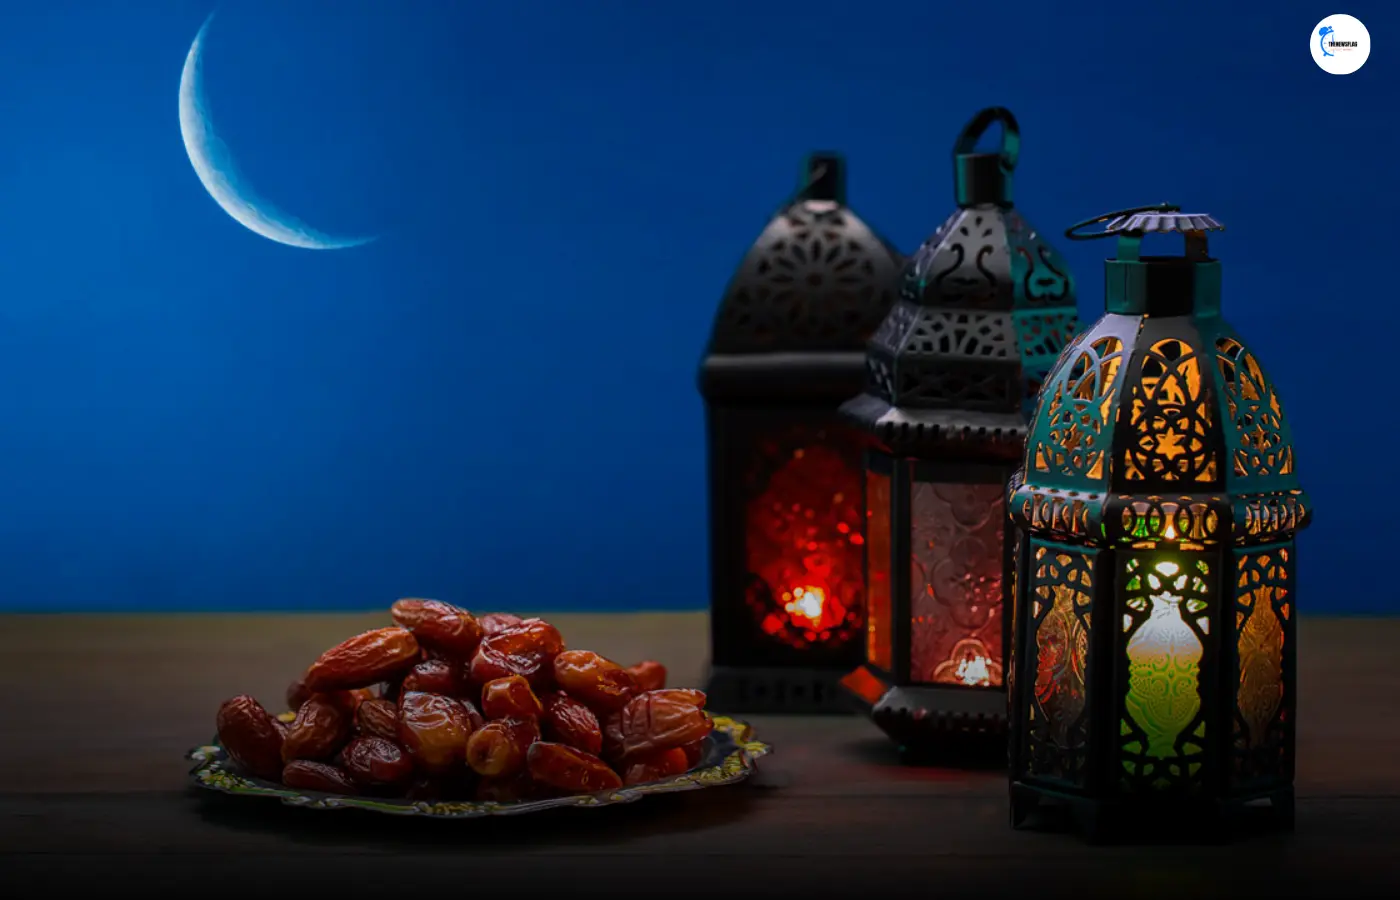 Accept the true meaning of Ramadan